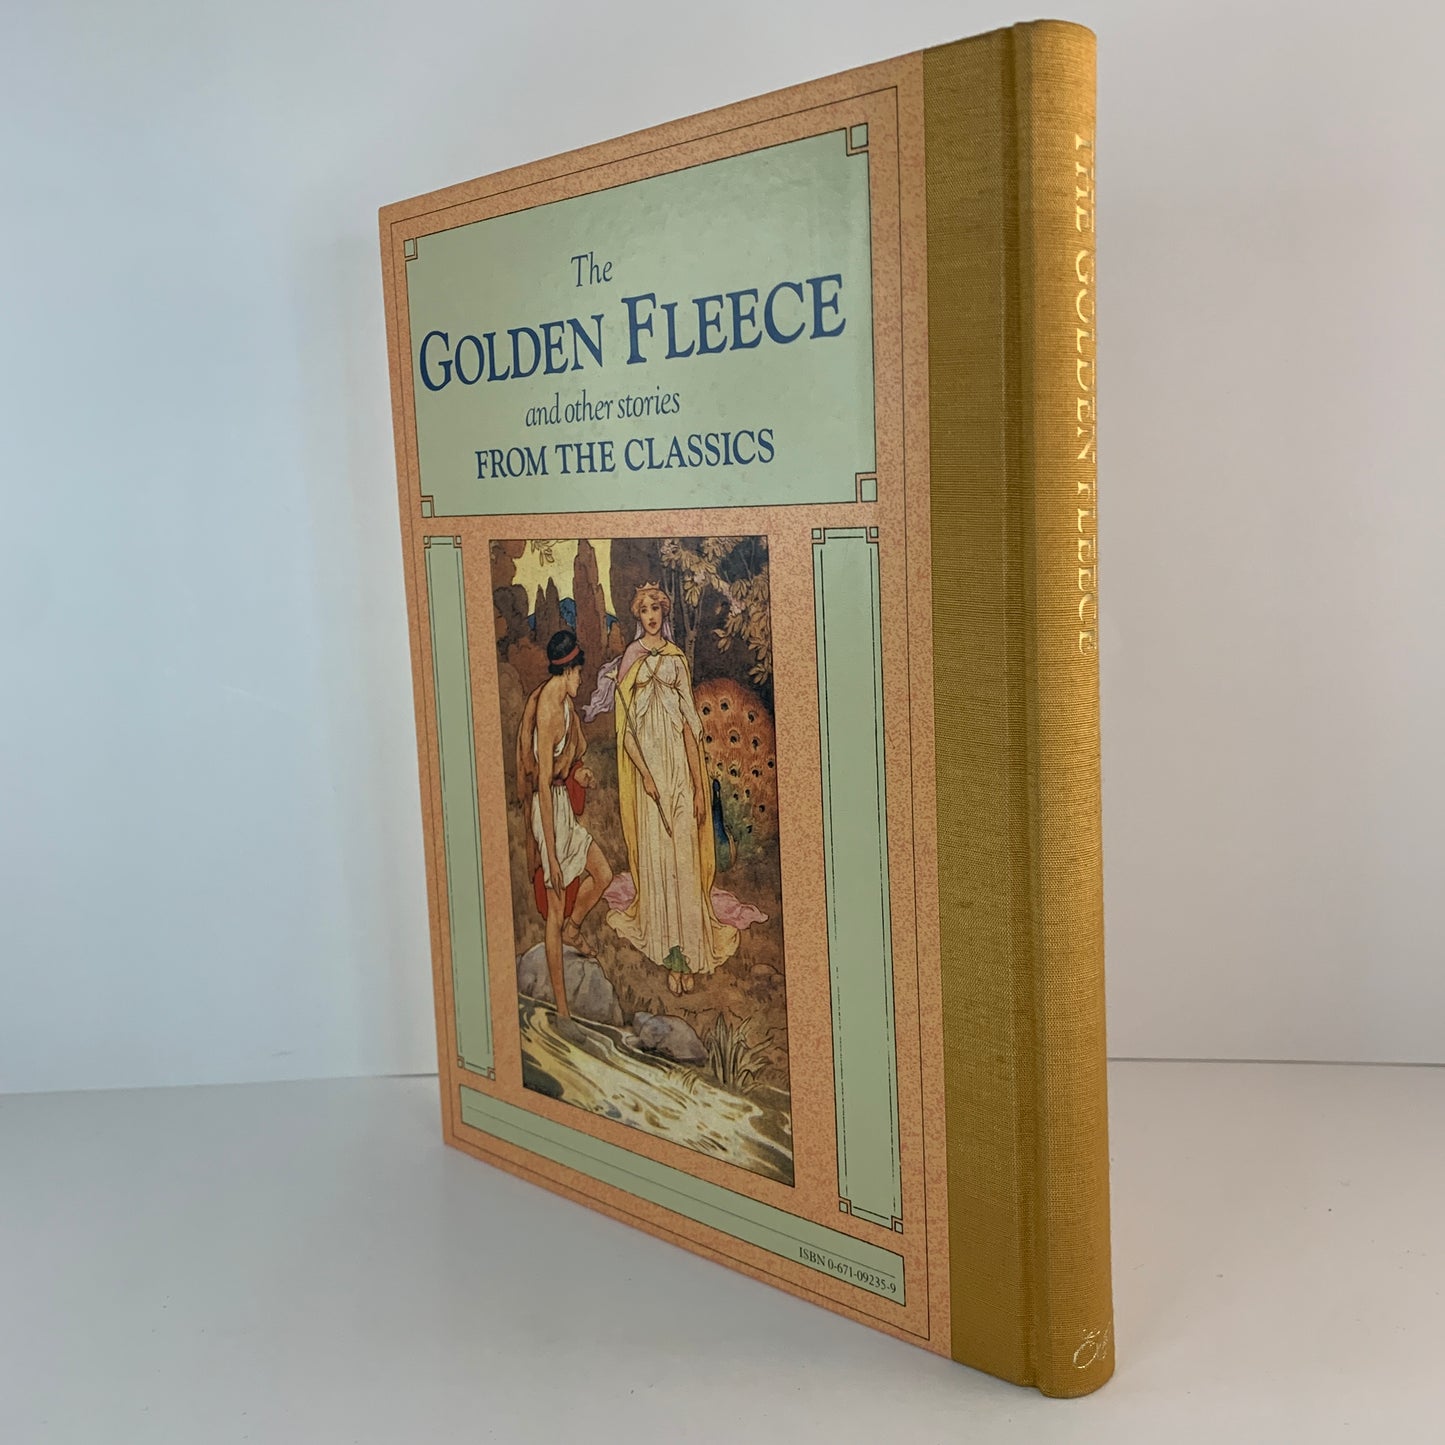 The Golden Fleece and Other Stories From the Classics